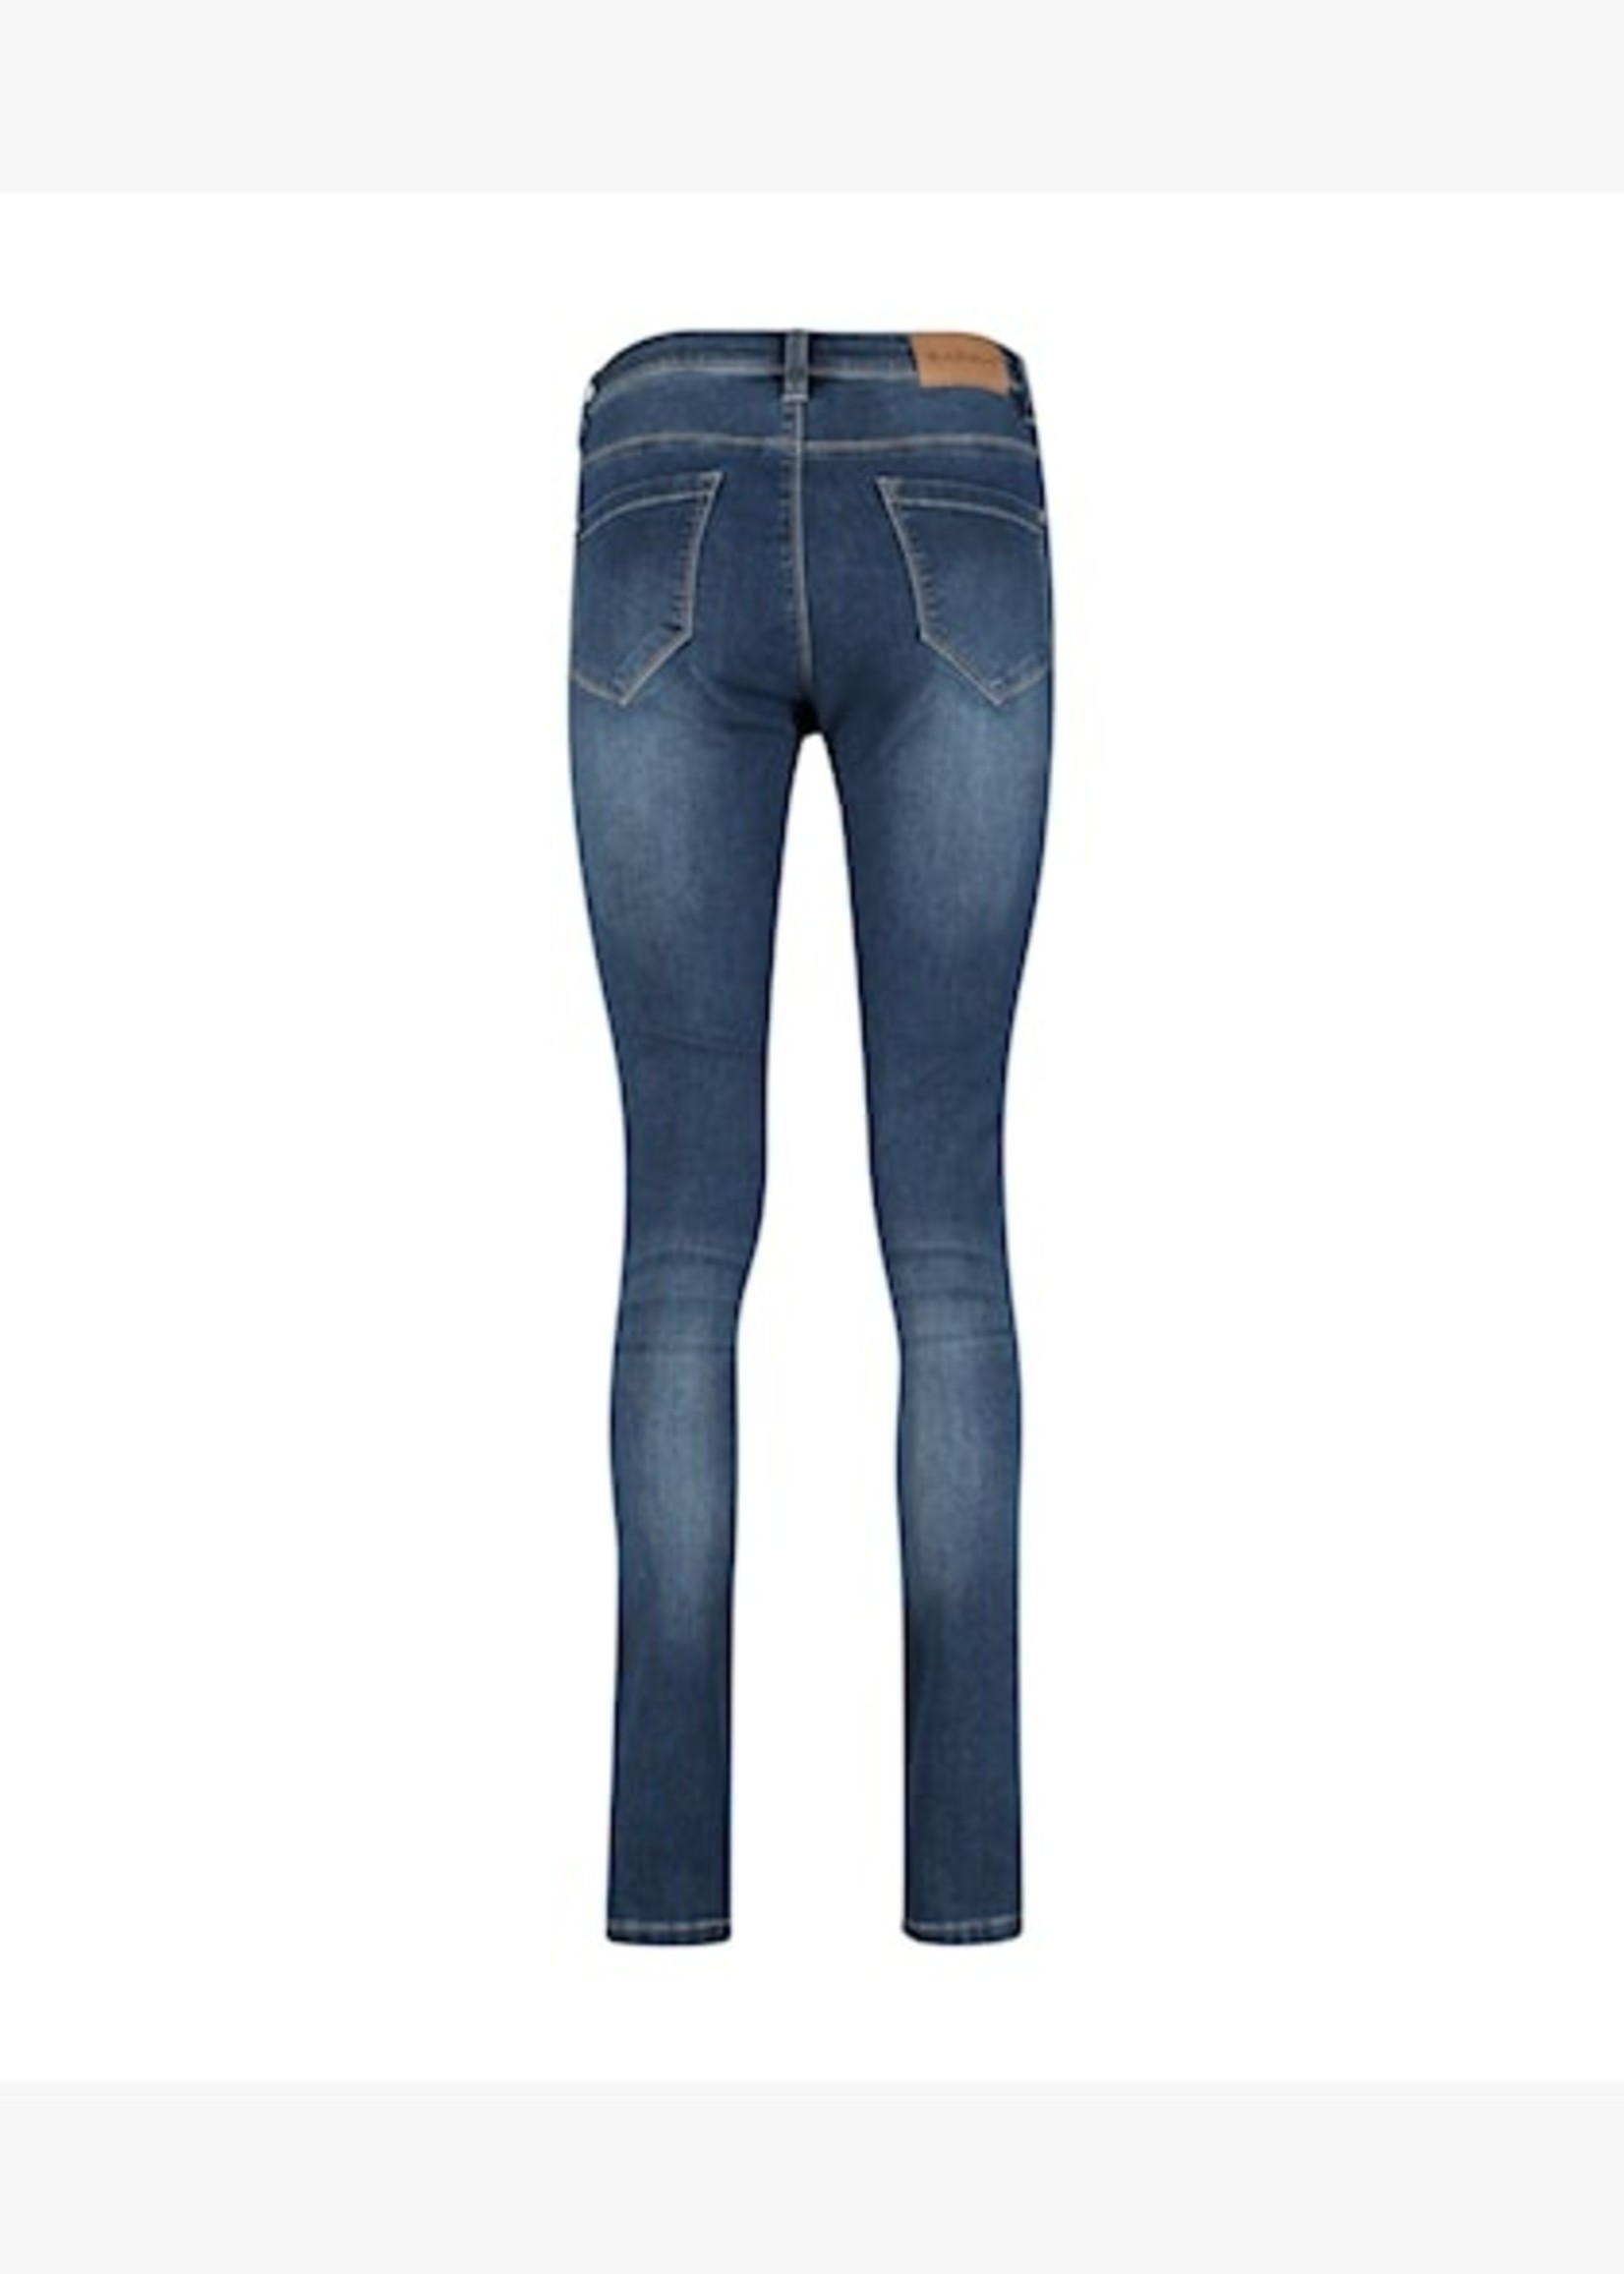 Red Button Jeans Jimmy - Midstone Used